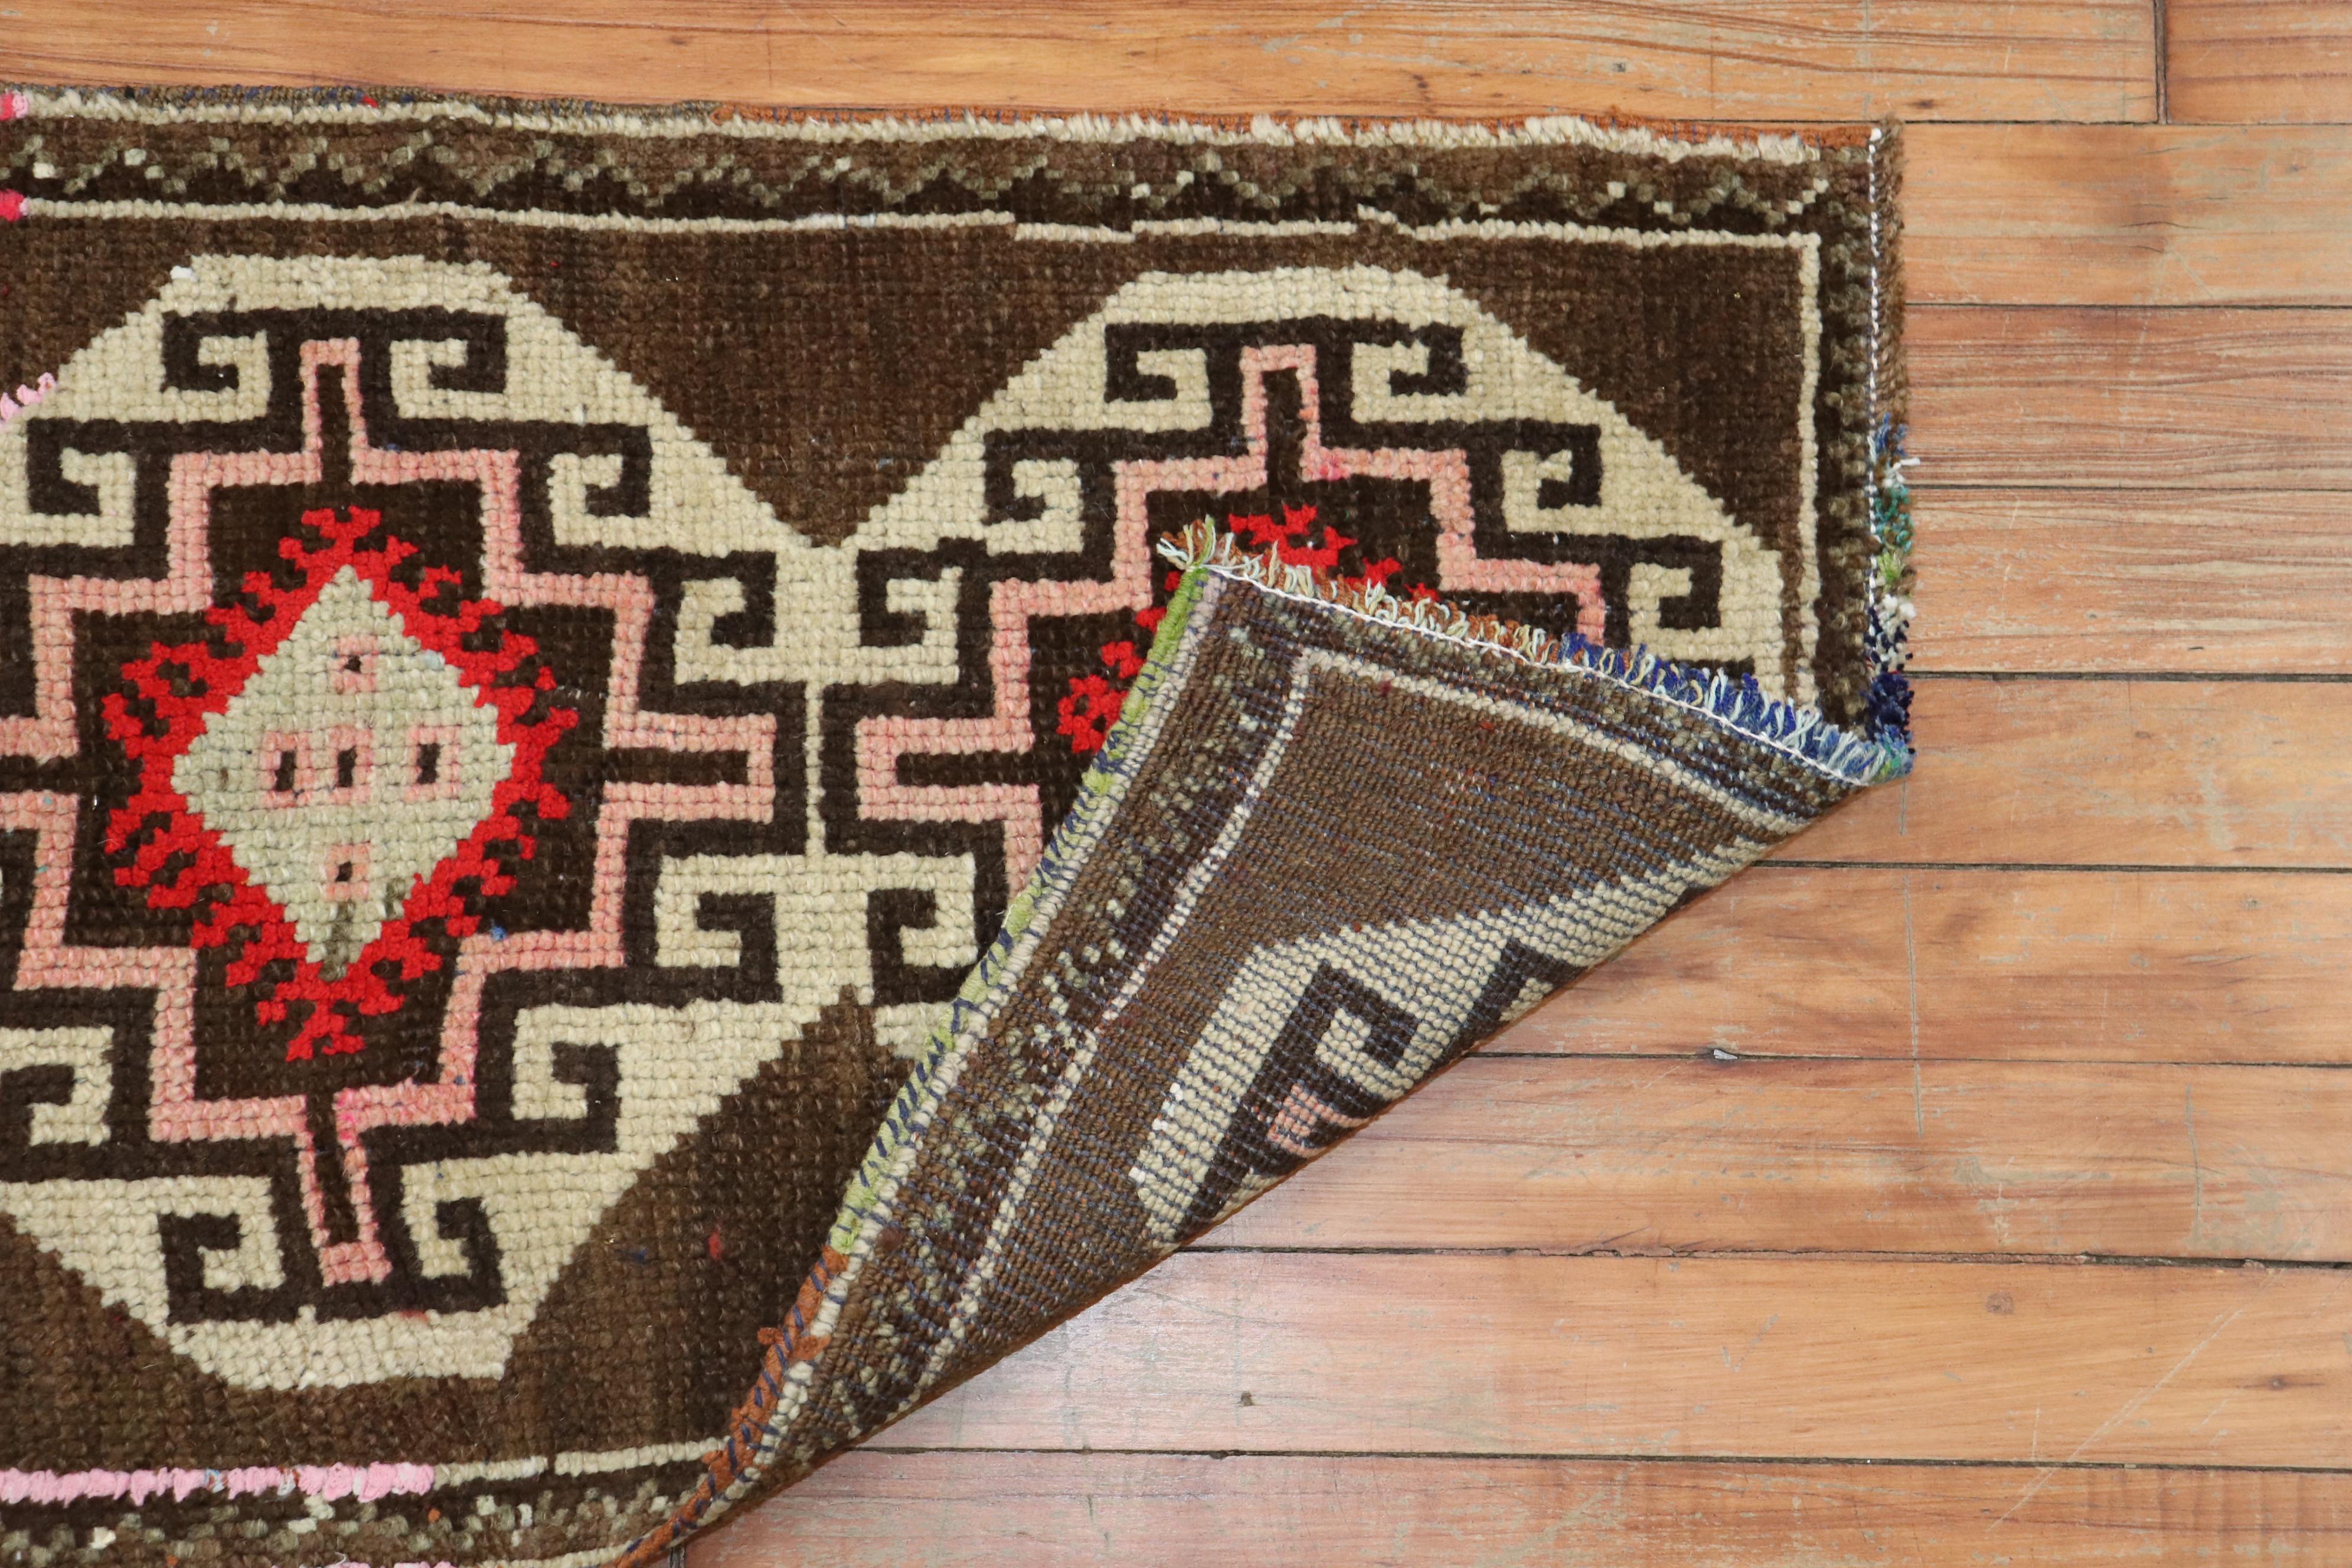 A matching pair of mid-20th century Turkish Anatolian rugs a tribal motif in red and white on a chocolate brown field

Measuring 18” x 33” and 18' x 35” respectively.